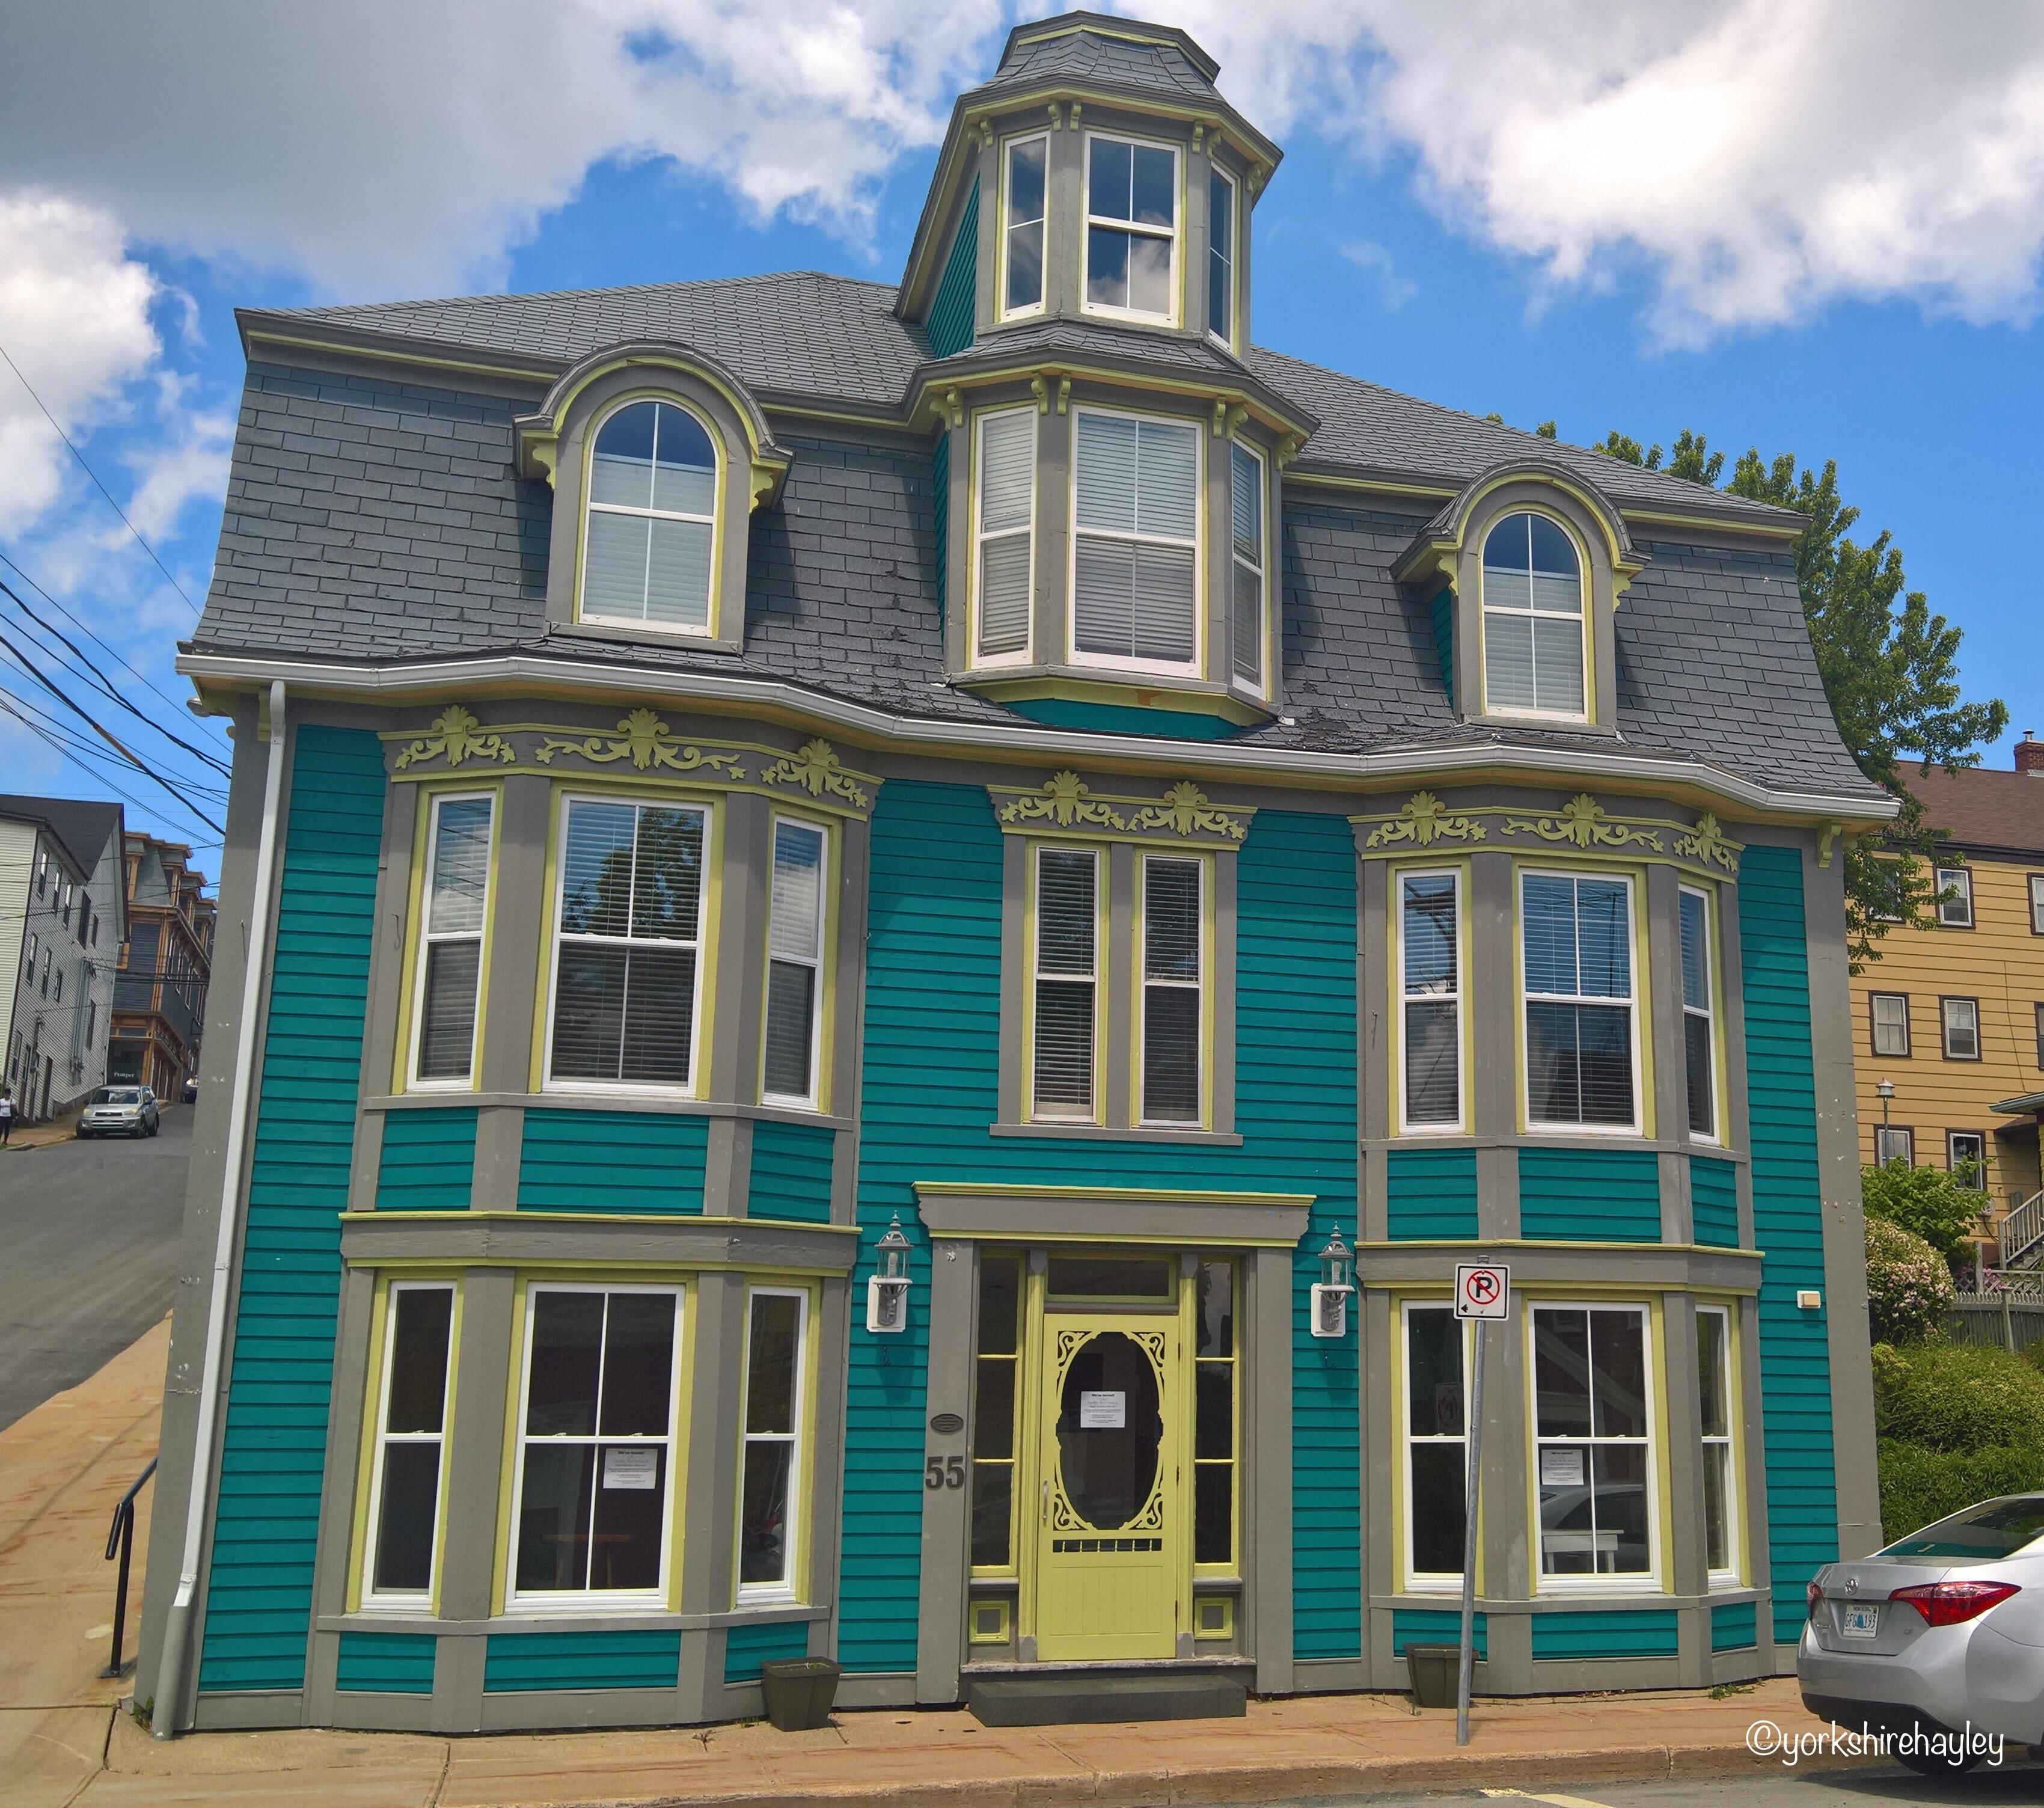 Houses like this are found throughout the historic centre of Lunenburg in Nova Scotia